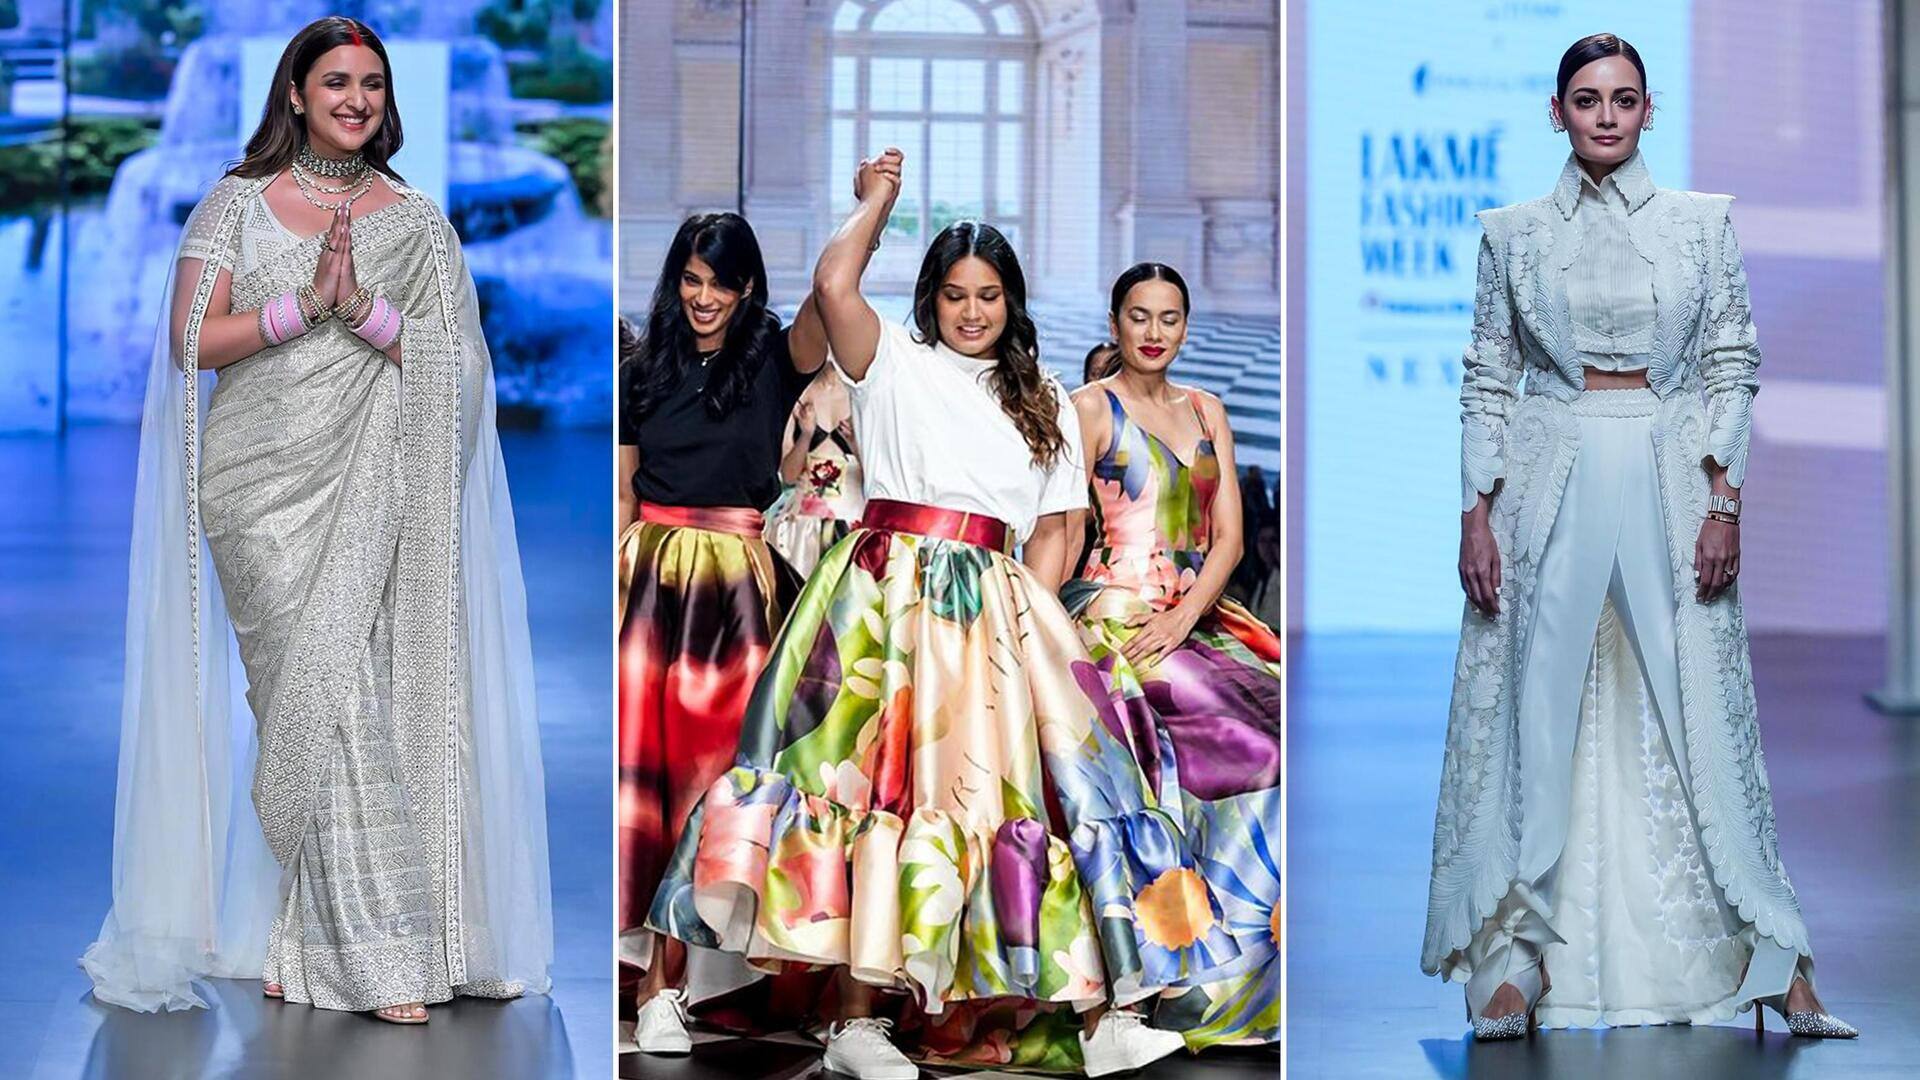 Lakme Fashion Week Highlights you can't miss